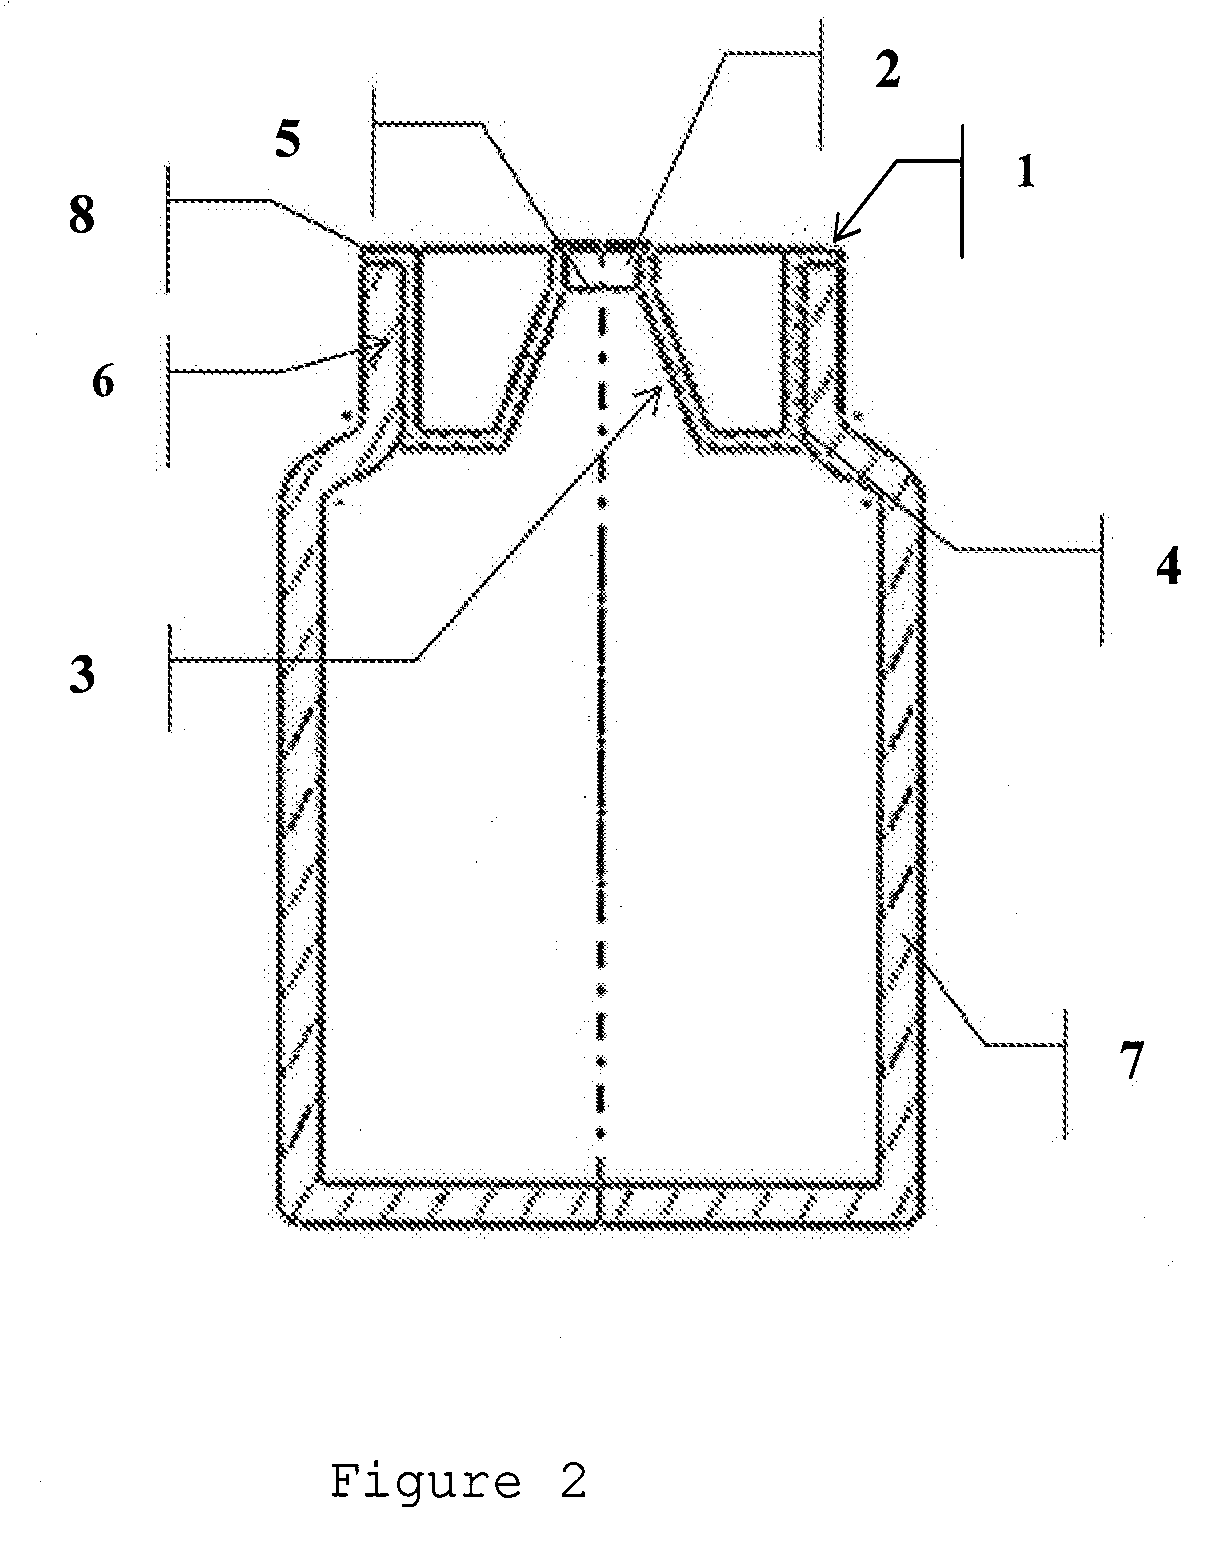 Device for Distributing and/or Controlling the Discharge of Unitary Products, Fitted Onto a Container, and For the In-Situ Treatment of its Internal Atmosphere